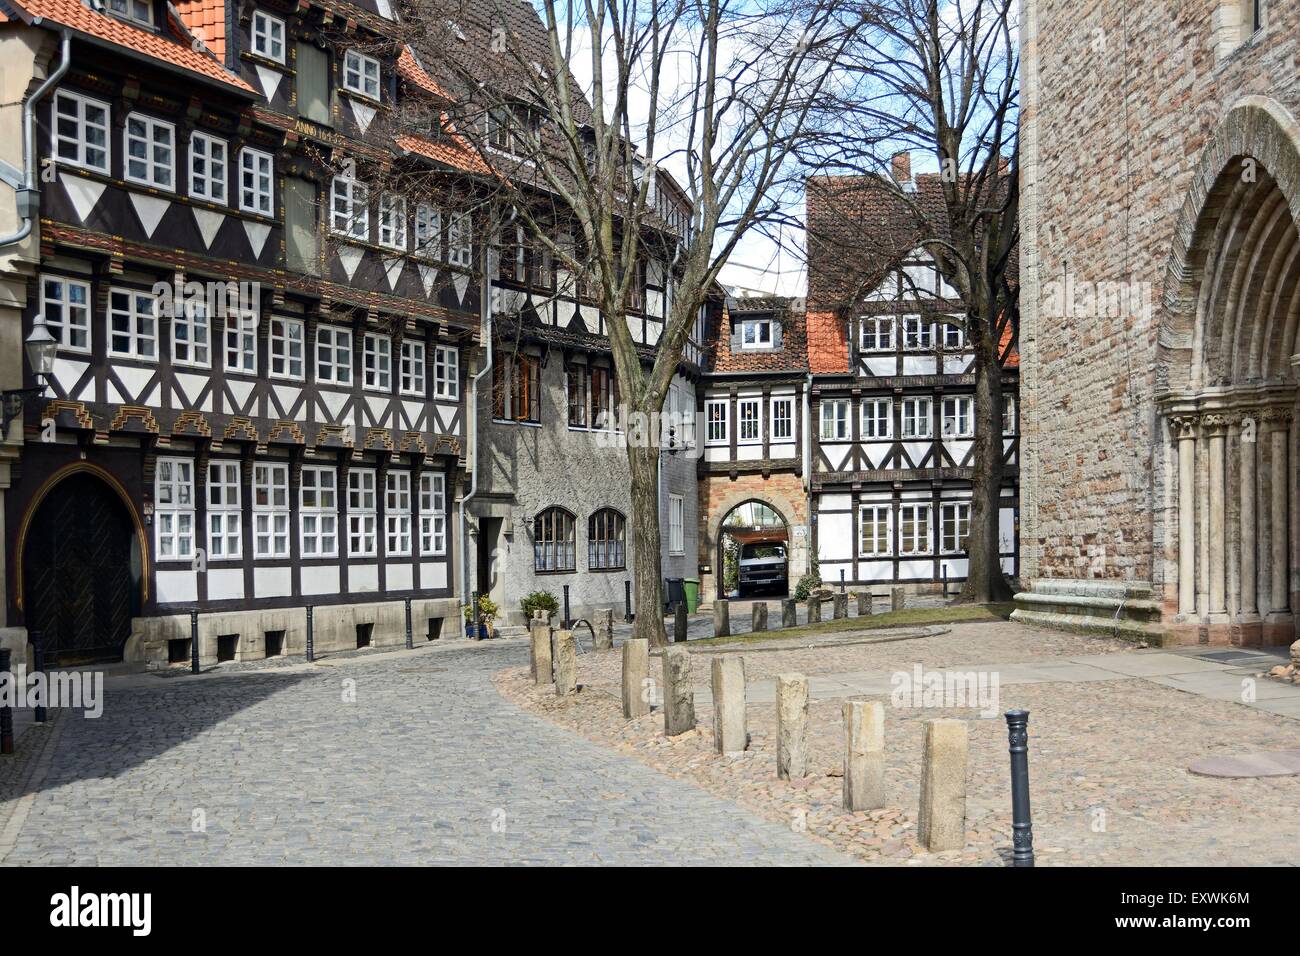 Timber-framed houses, Braunschweig, Lower Saxony, Germany, Europe Stock Photo